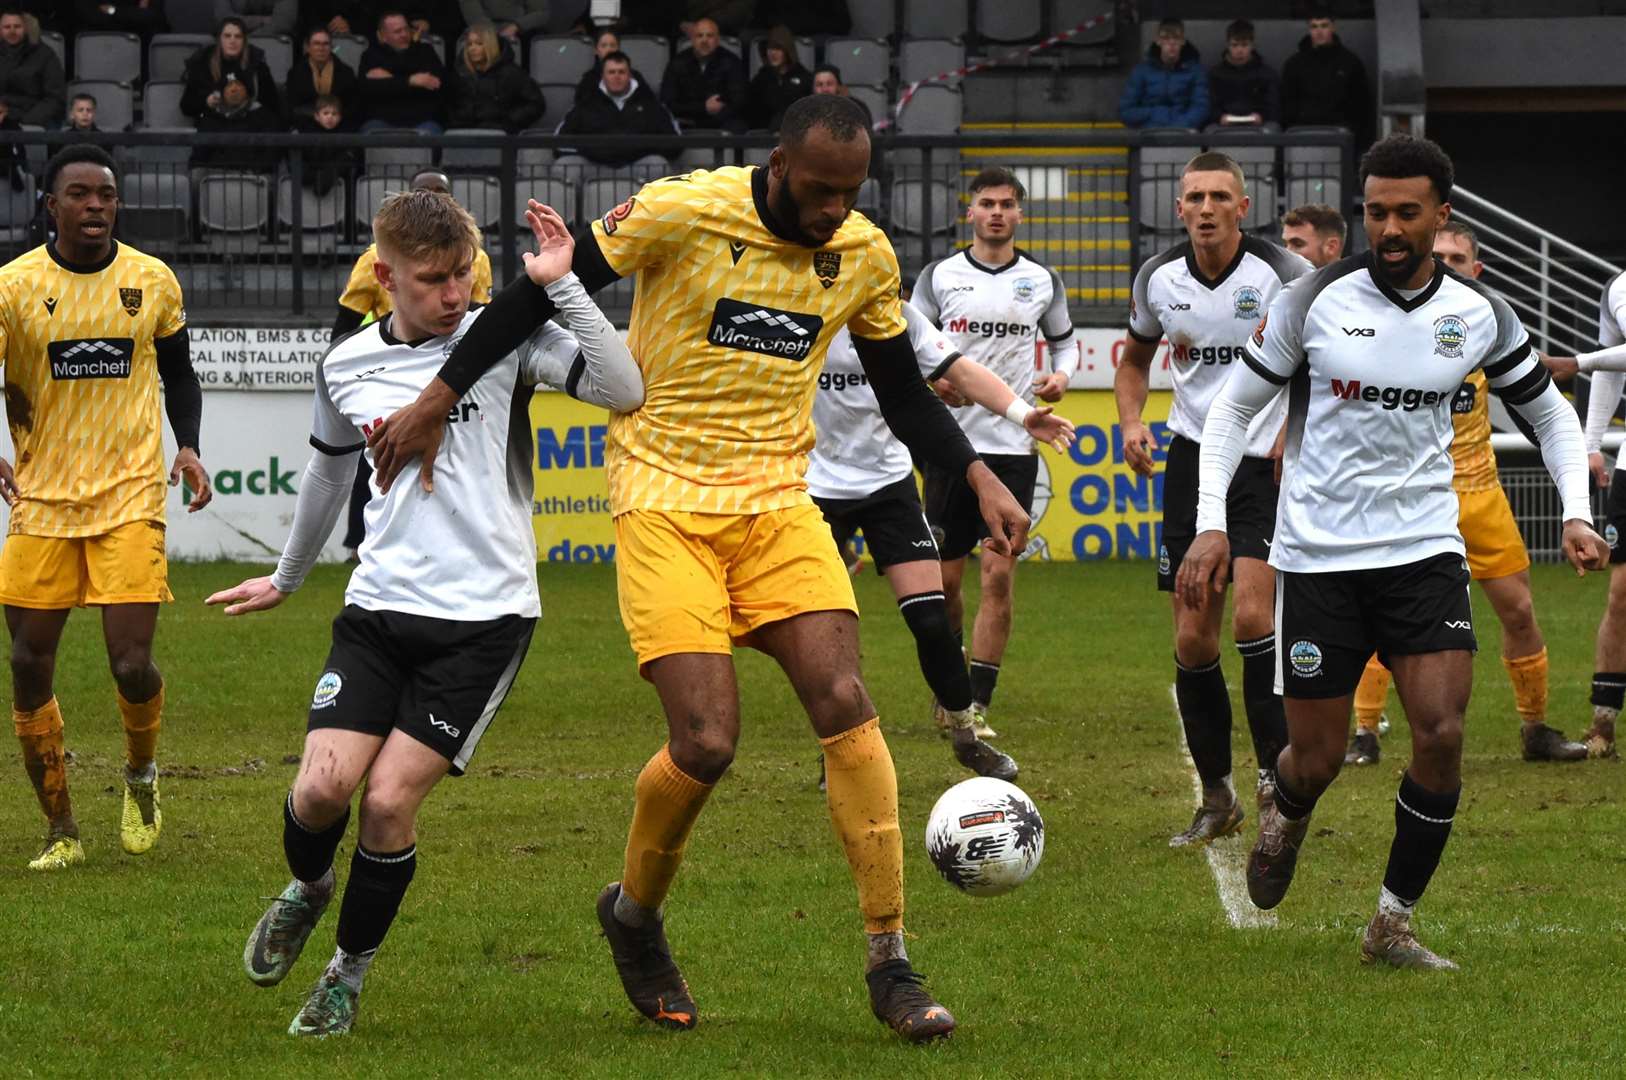 Dover stick to their guns against Maidstone. Picture: Steve Terrell